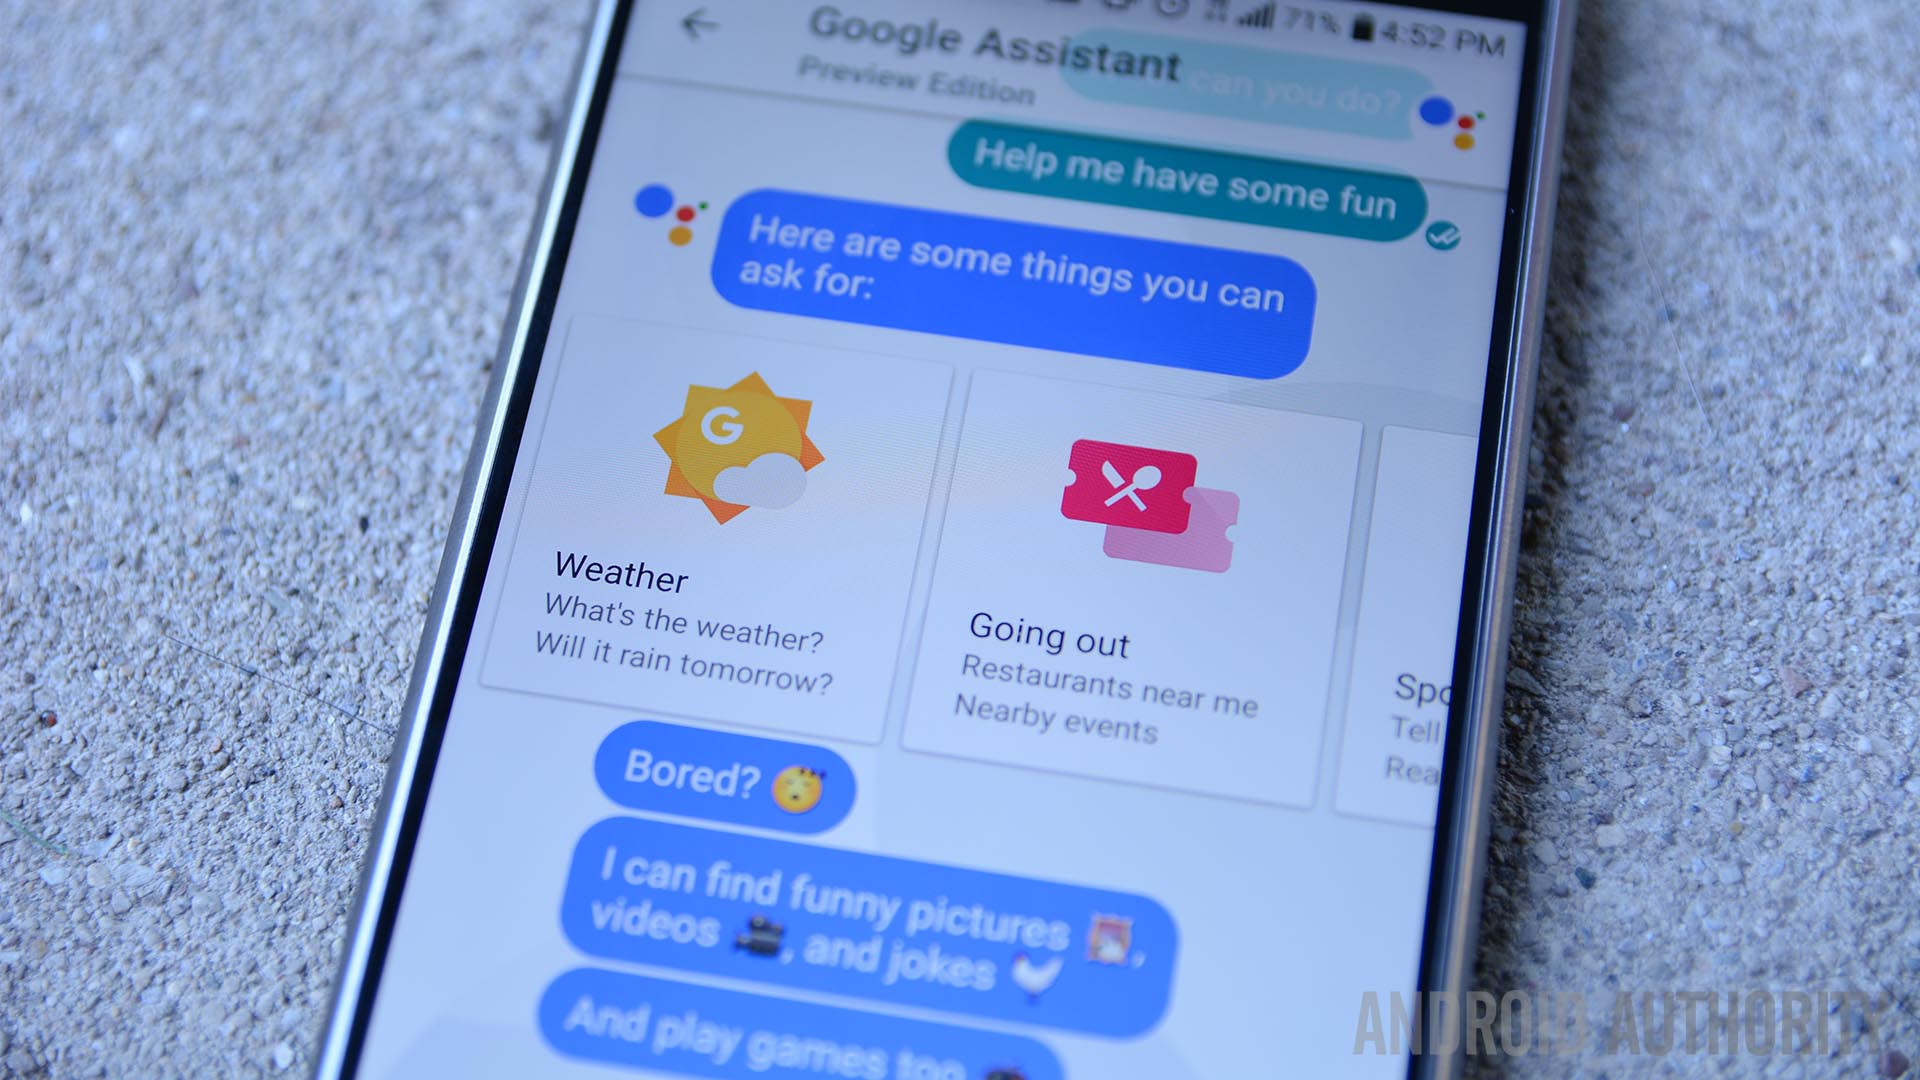 Google Assistant in Allo chat app